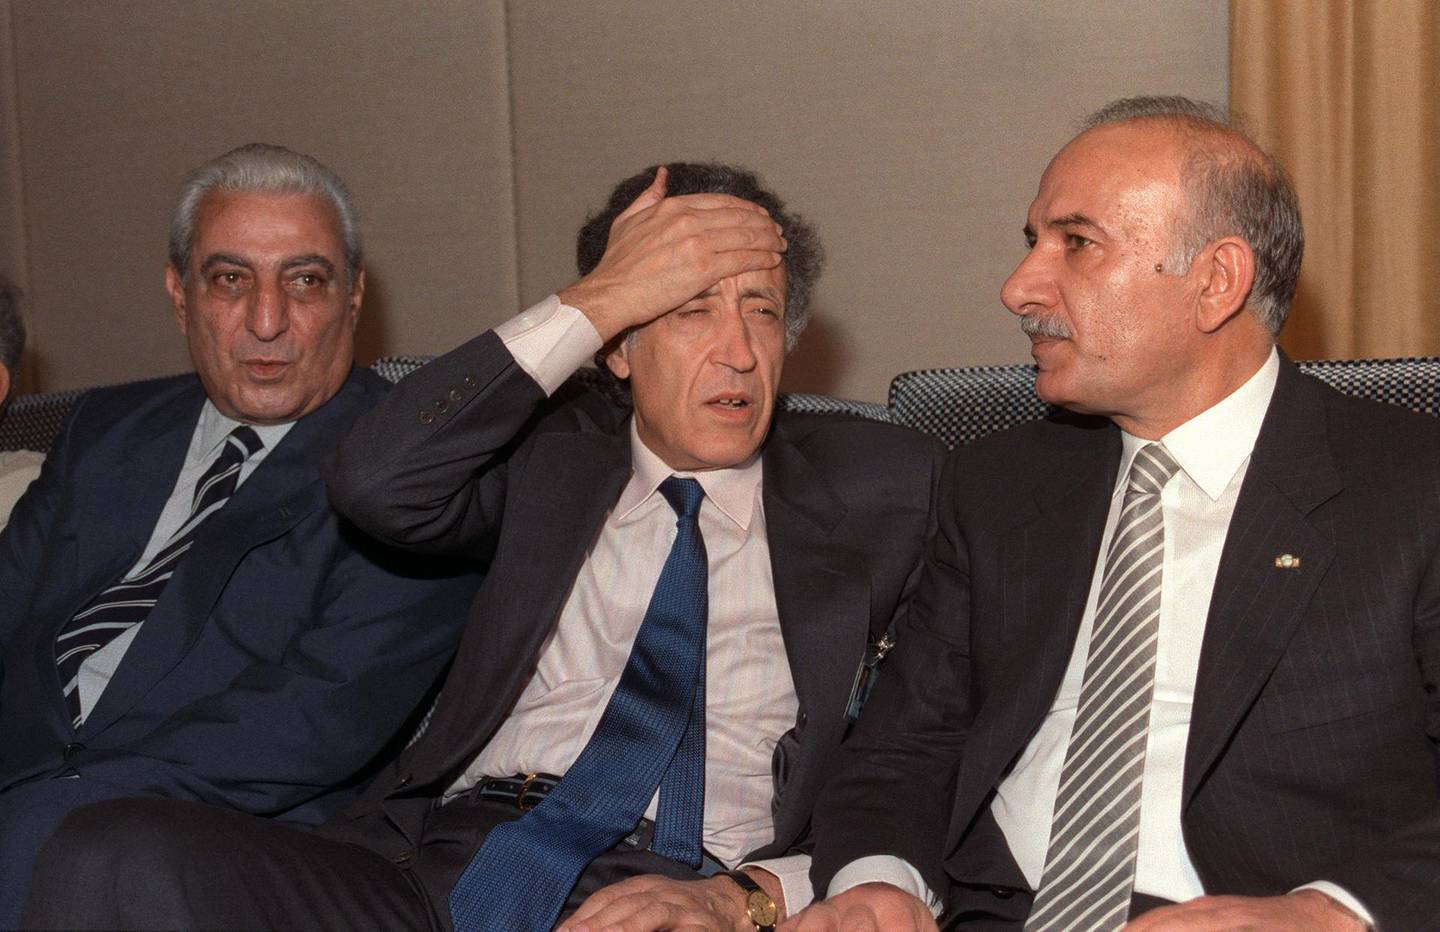 Sitting between Lebanese Parliament speaker Hussain al-Hussaini (R) and deputy Abdelallah Rassi (L), the Arab League envoy, Algerian Lakhdar Ibrahimi puts his hand on his forehead 29 September 1989 in Taif after the members of Lebanese National Assembly started to discuss the charter of national reconciliation. The session was attended by 31 Christian and 31 Muslim MP's. At a further meeting 22 October 1989, the charter of national reconciliation (the Taif Agreement) was endorsed by 58 of the 62 deputies attending the session. The Taif agreement provided for the transfer of executive power from the presidency to a cabinet, with portfolios divided equally among Christian and Muslim ministers. (Photo by NABIL ISMAIL / AFP)